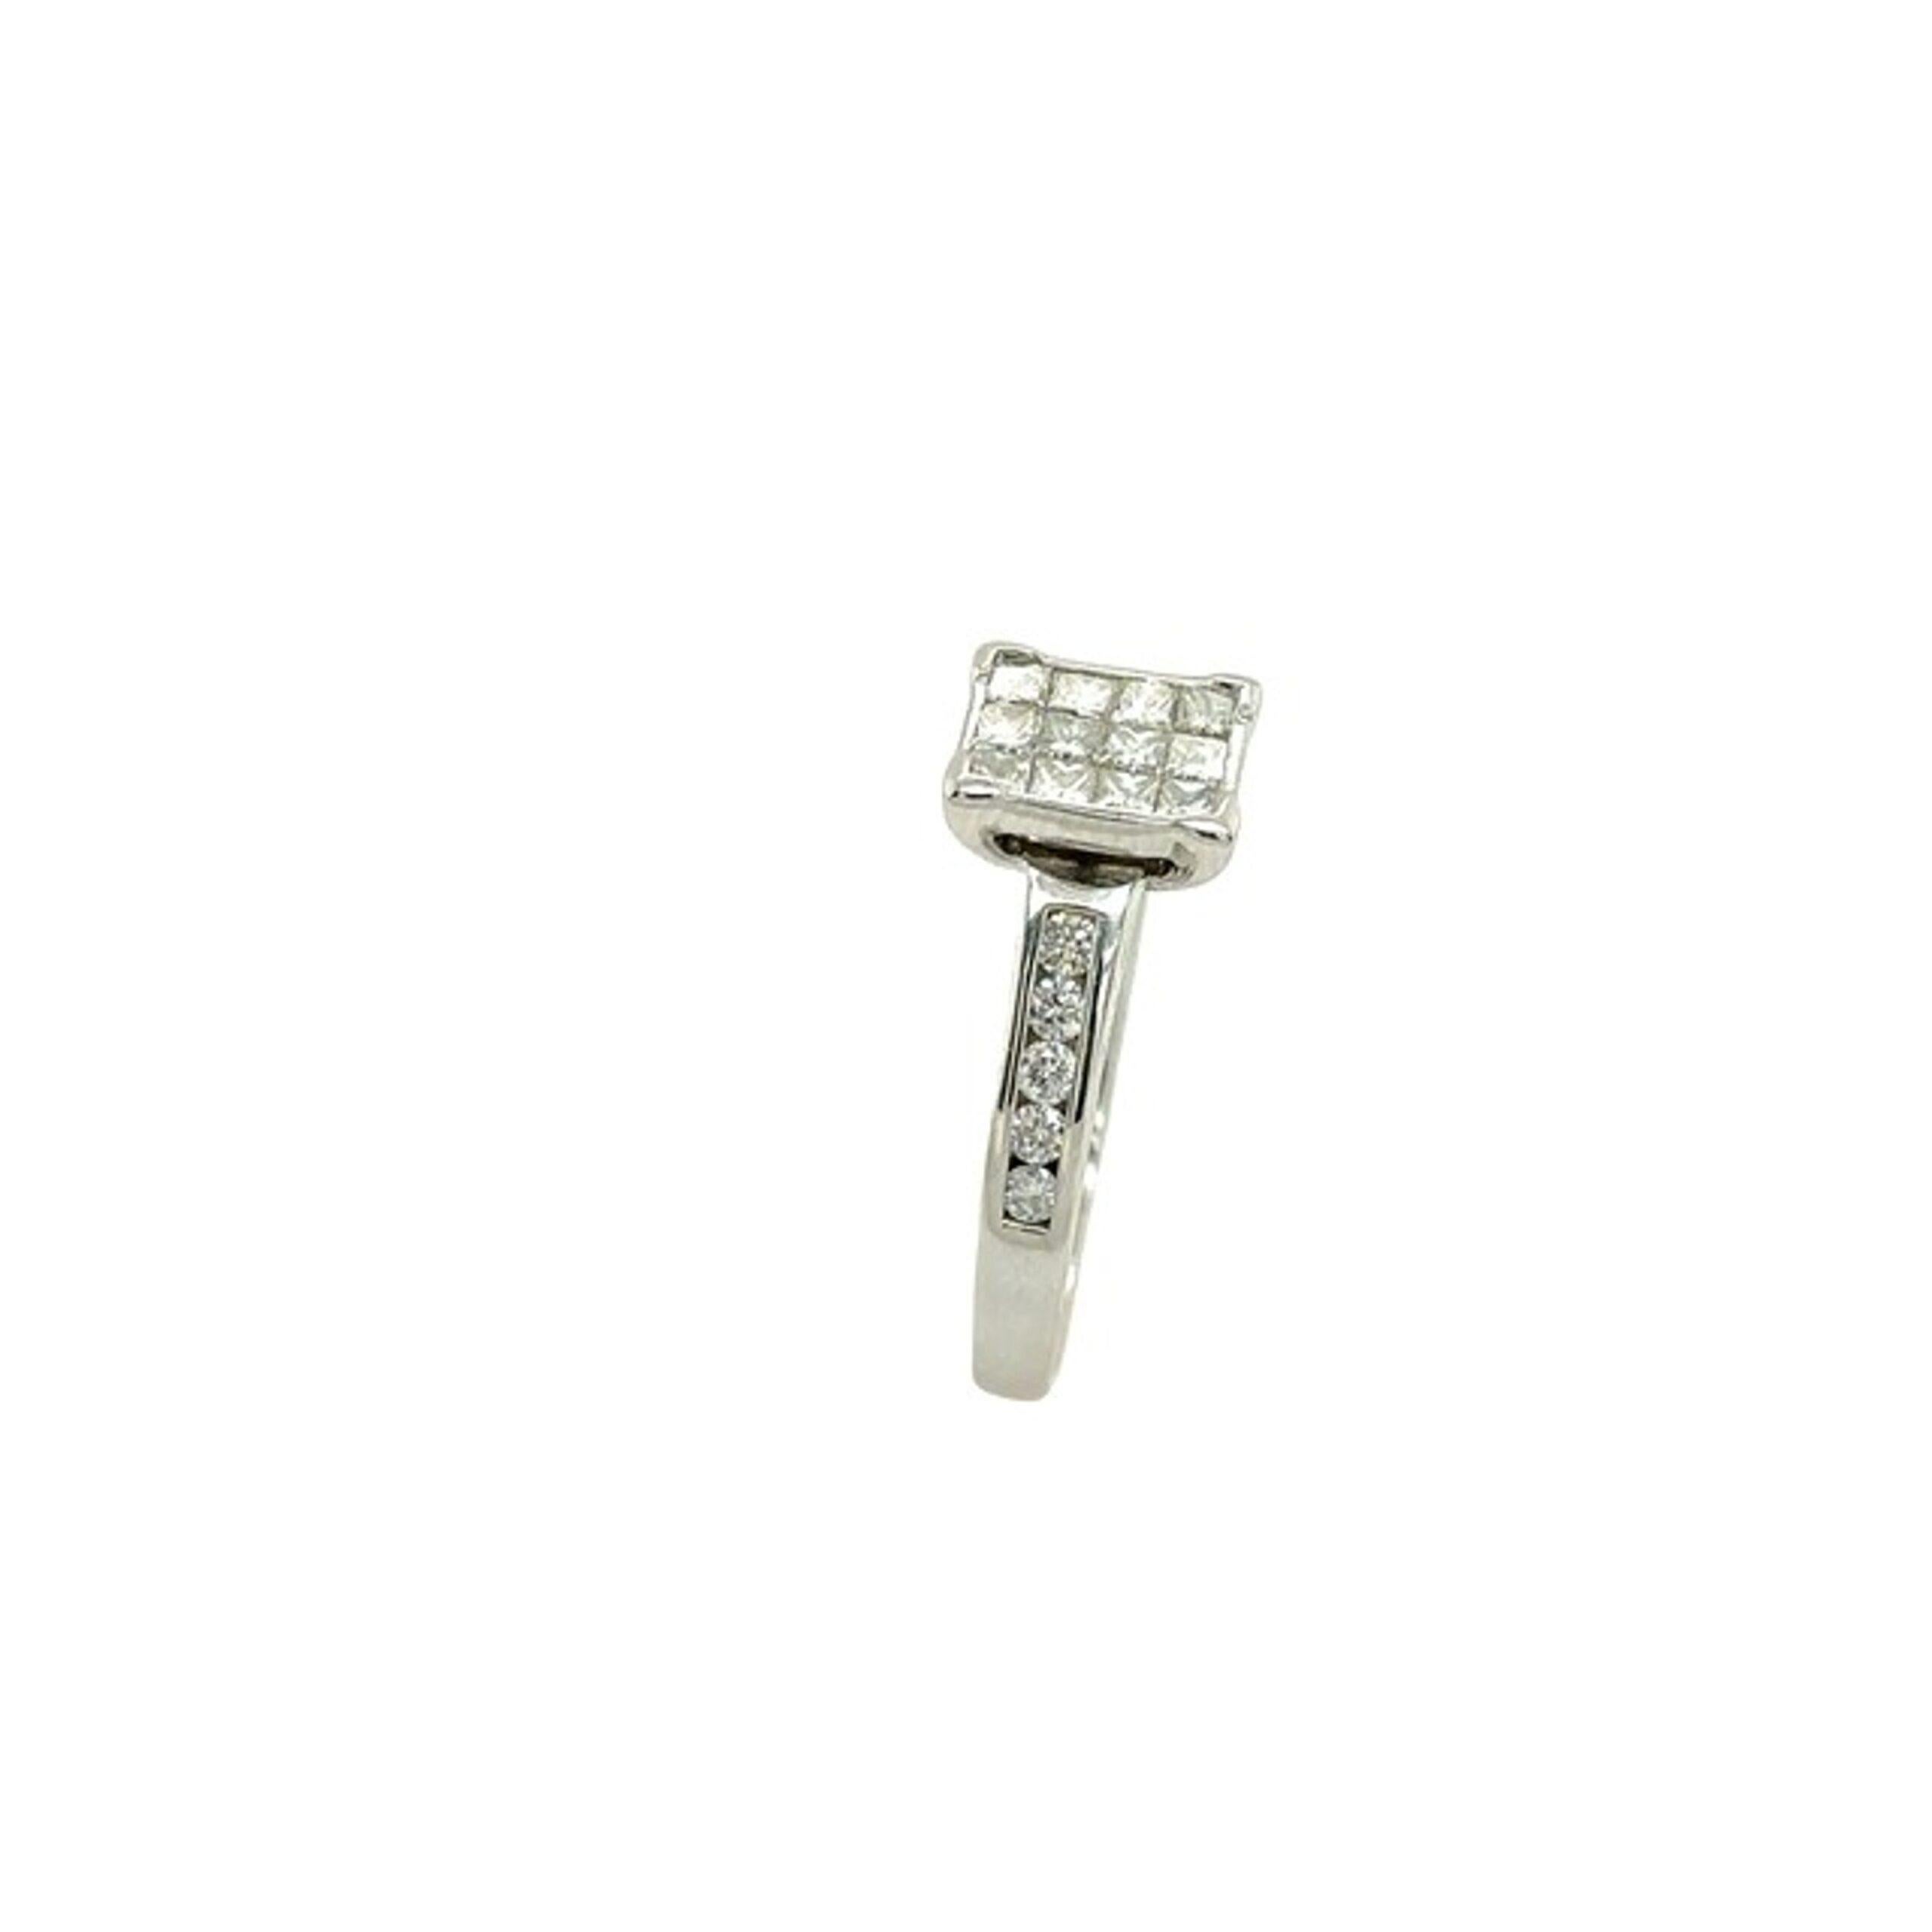 18ct White Gold Classic Princess Cut Diamond Ring, Set With 0.85ct of Diamonds

This is a cluster design of diamonds, it is a white gold ring with a princess cut diamond in the center and ten round diamonds on each shoulder, with a total diamond